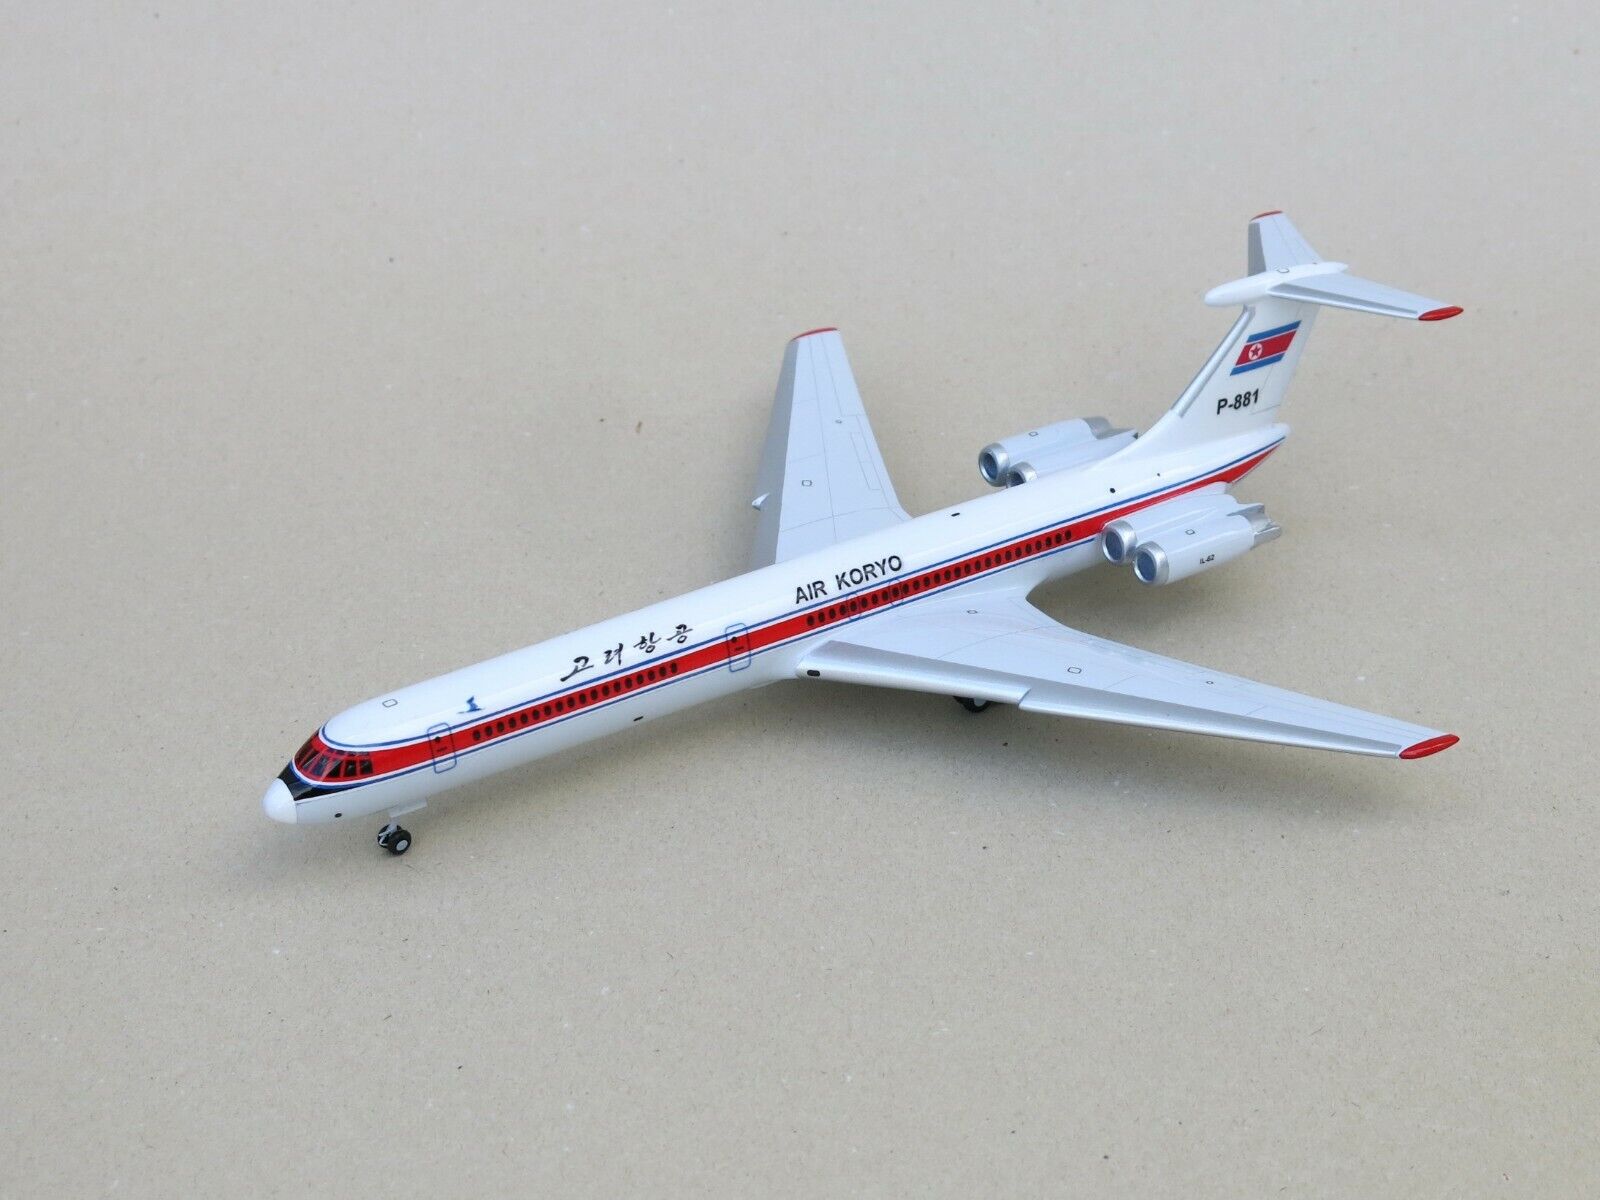 IL-62M Scale 1:100  Air Koryo Airlines Exclusive Handmade on Landing Gear